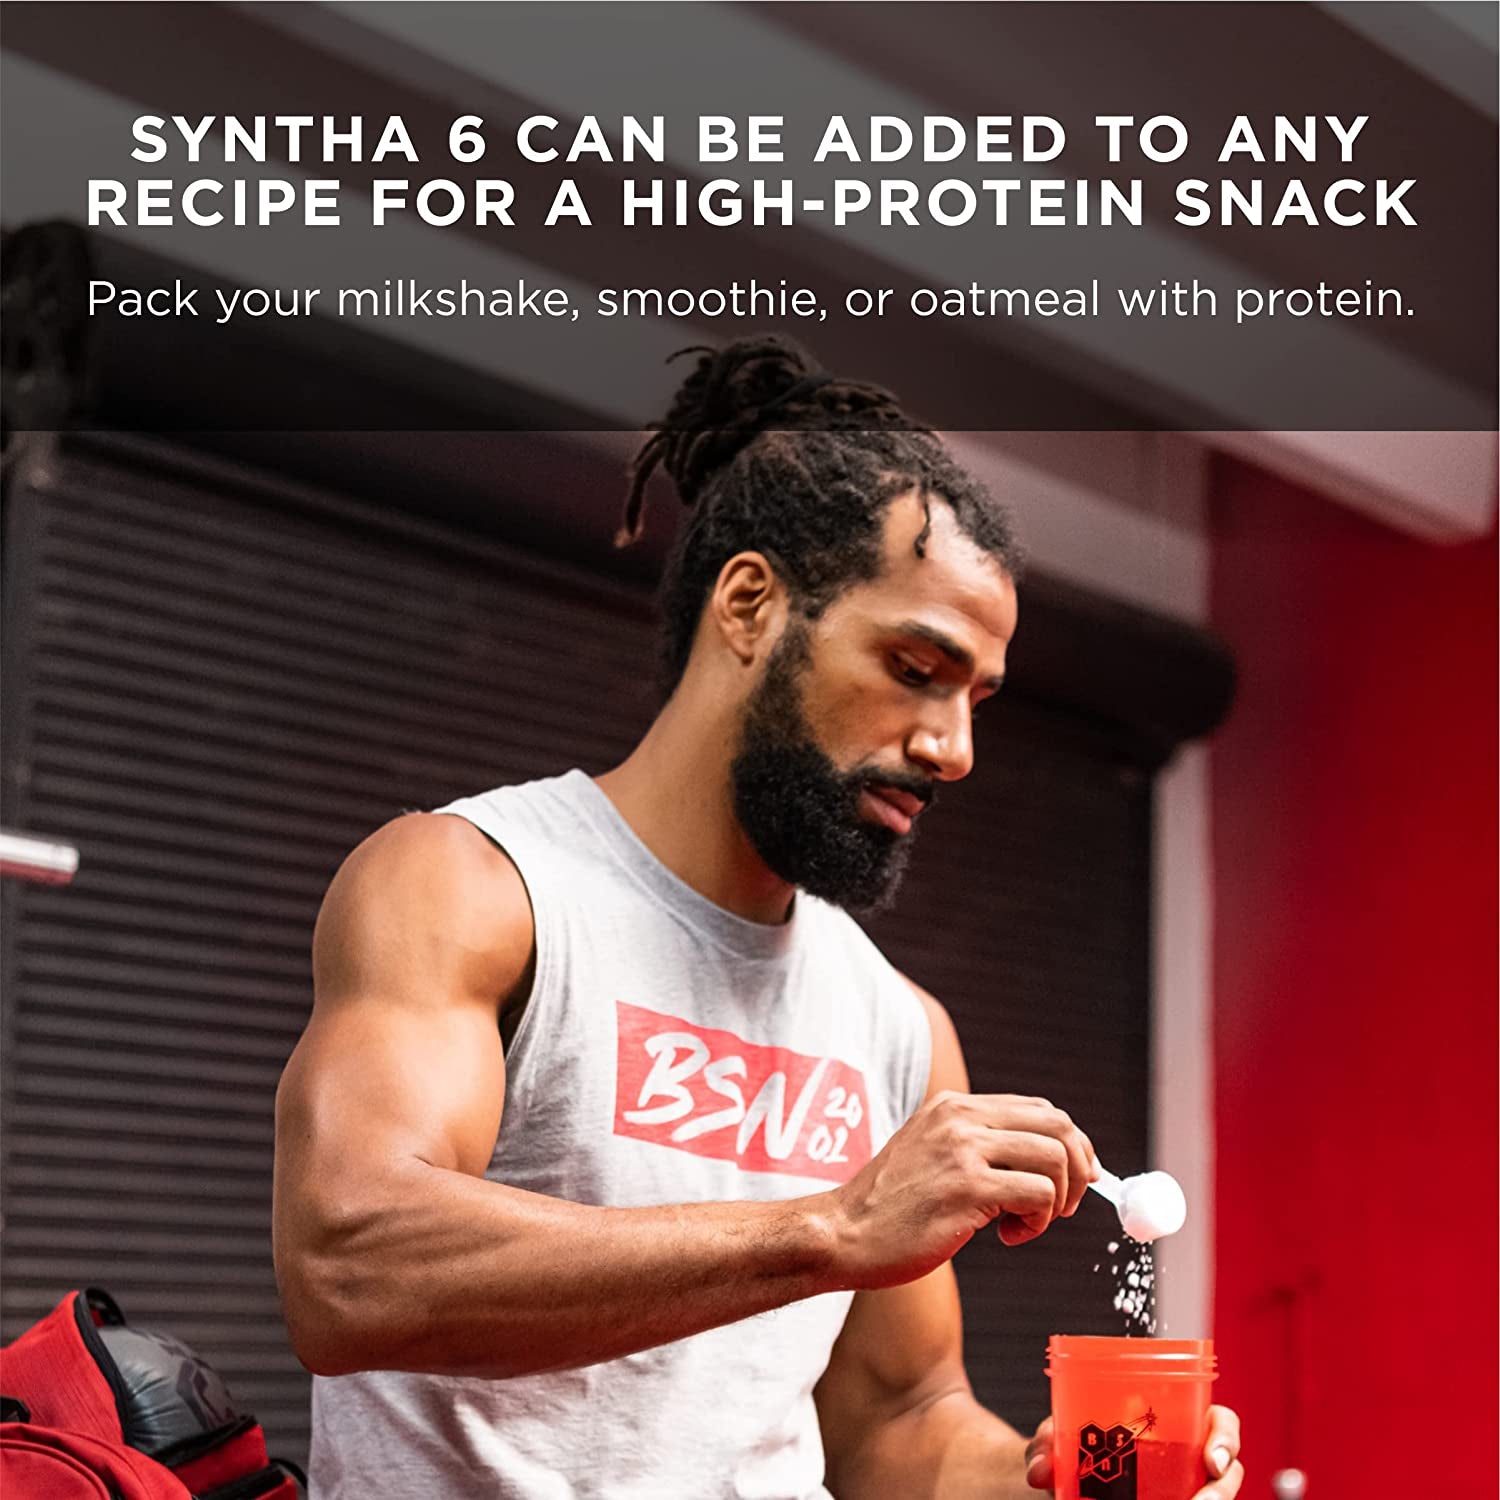 SYNTHA-6 Whey Protein Powder with Micellar Casein, Milk Protein Isolate Powder, Vanilla Ice Cream, 48 Servings (Packaging May Vary)